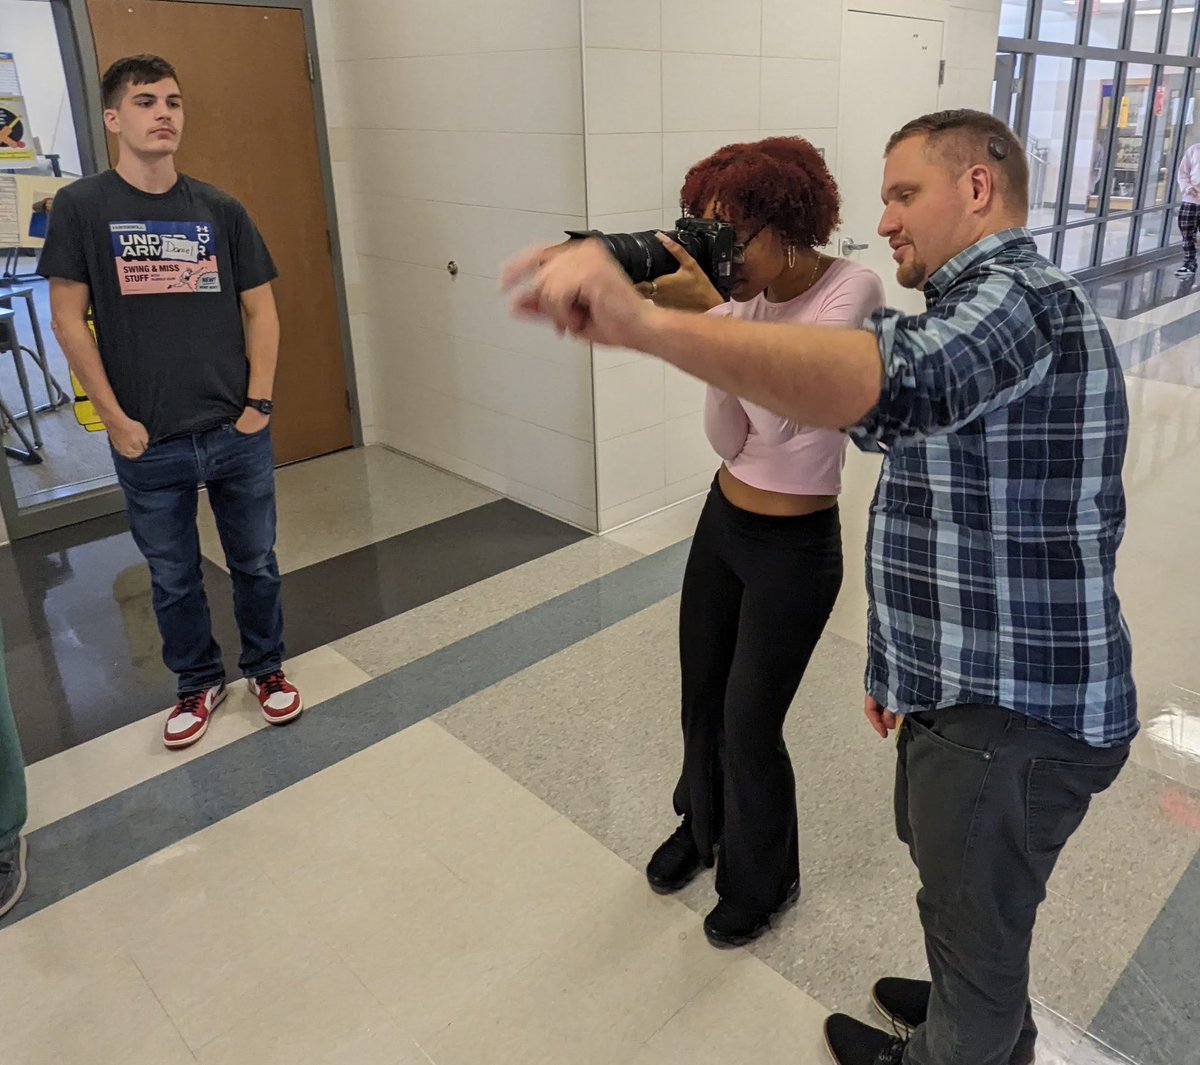 FHS alum Matt Sprague met with LYNX scholars to discuss the variety of careers in Photography. Students engaged in demonstrations using lighting equipment and were even able to receive advice from Matt’s professional eye on their own photos! @FCPSMaryland